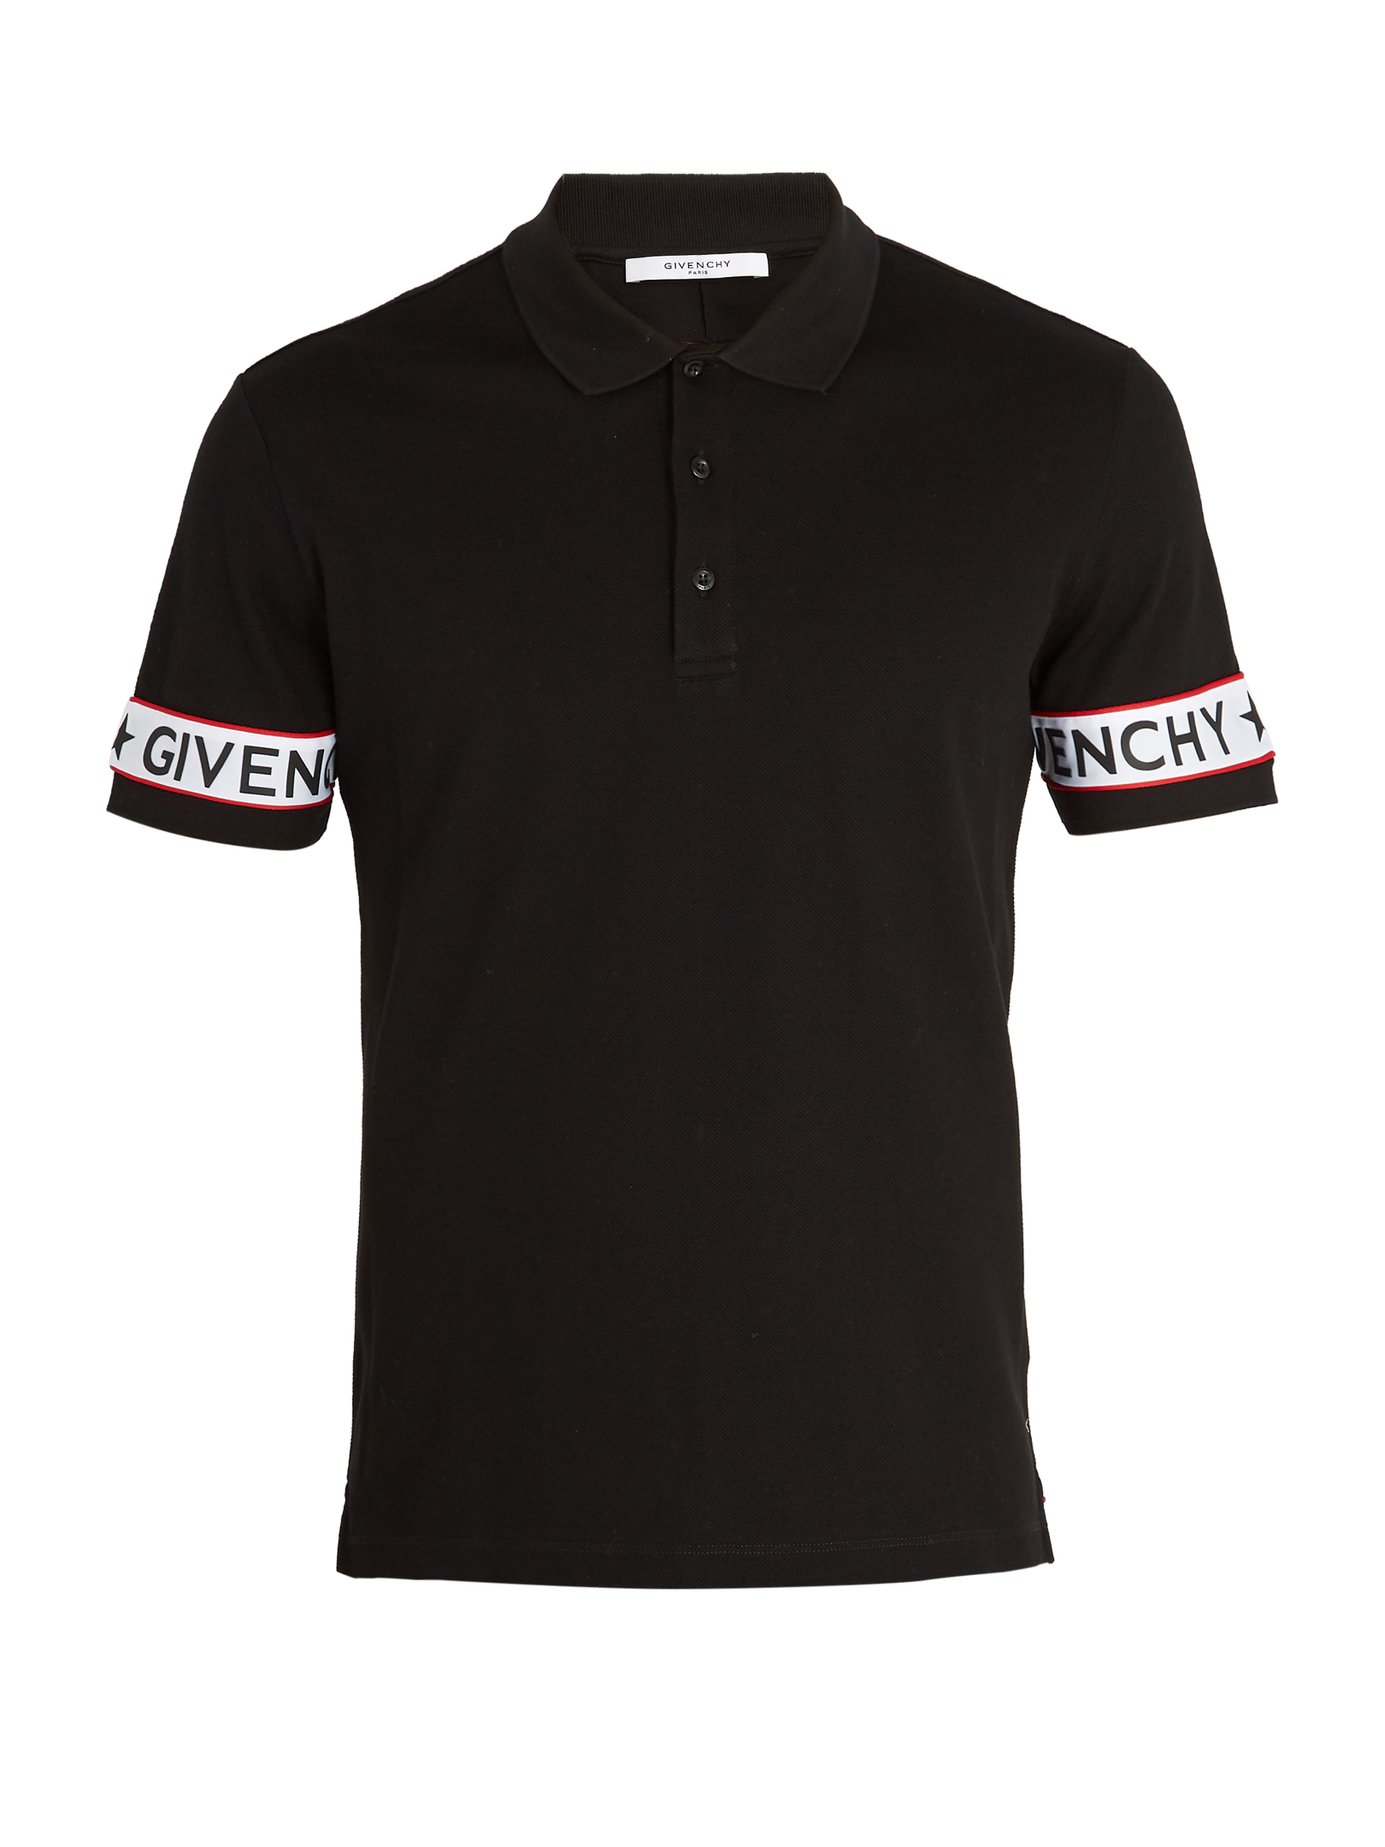 GIVENCHY Cuban-Fit Elastic-Trimmed Cotton-Pique Polo Shirt in Black ...